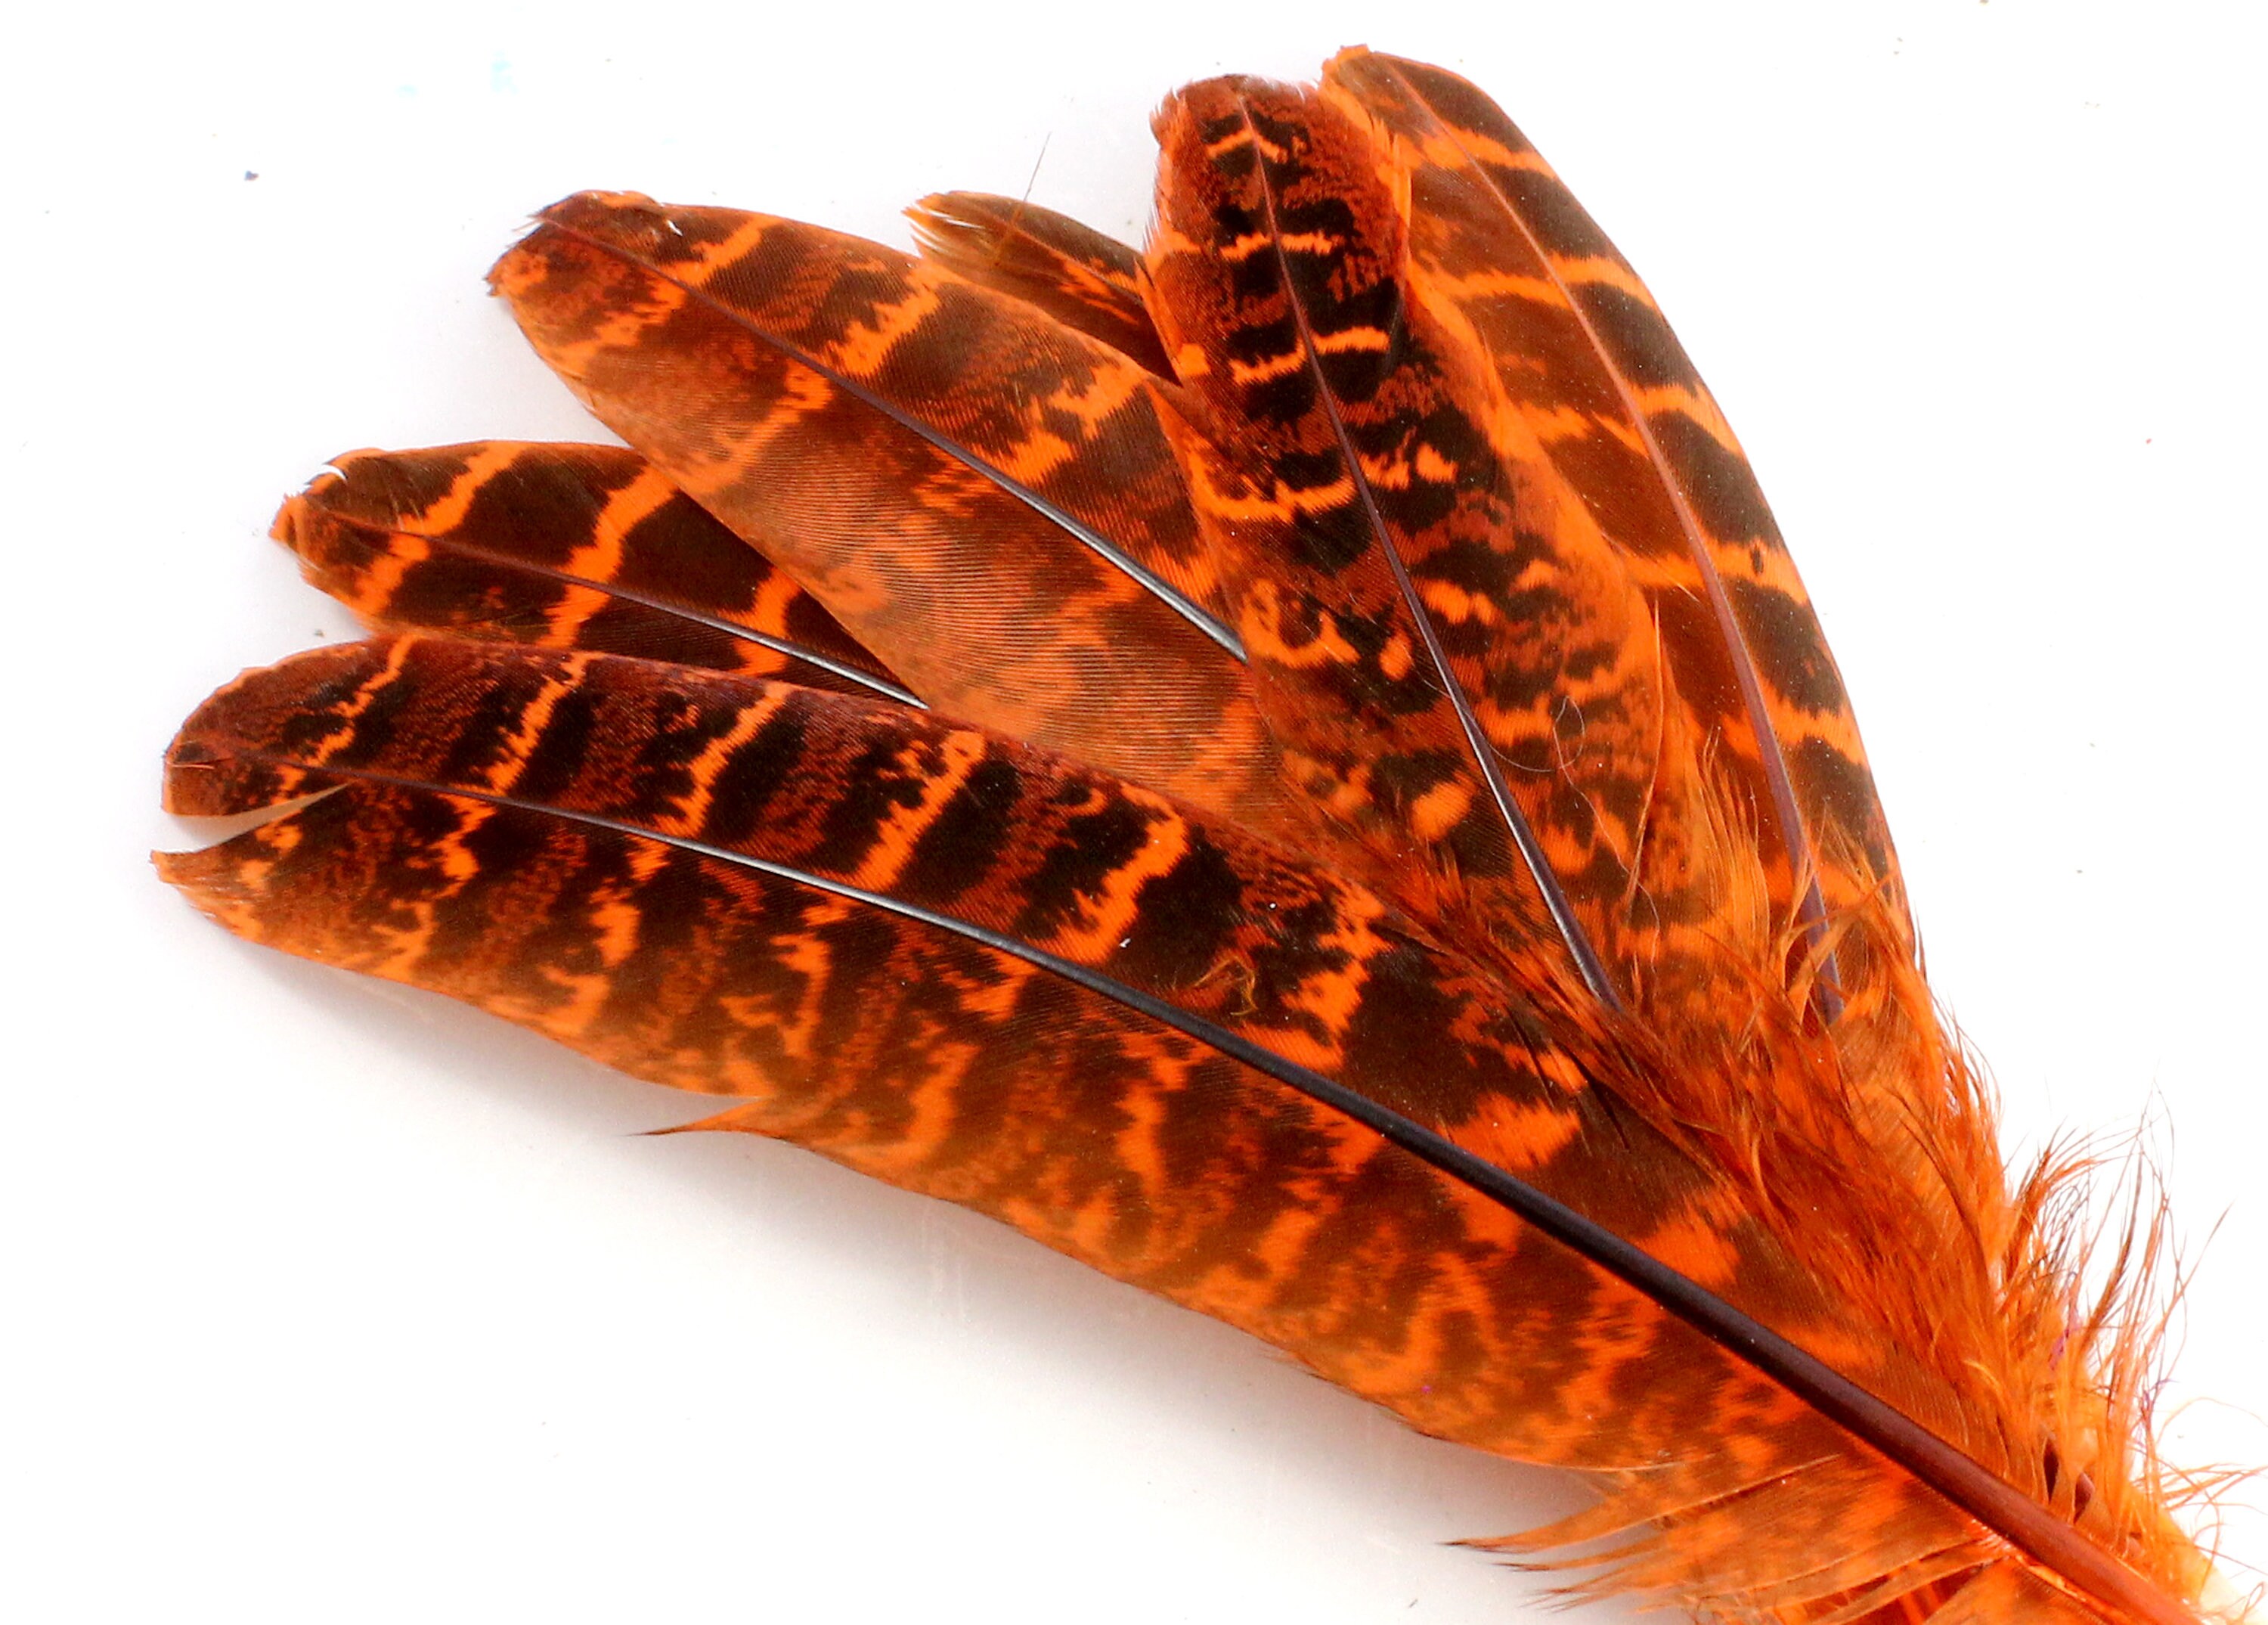 Small Orange Feathers for Crafts Laced Hen Feathers Black Orange Craft  Feathers Oval Feathers Short Orange Feathers 